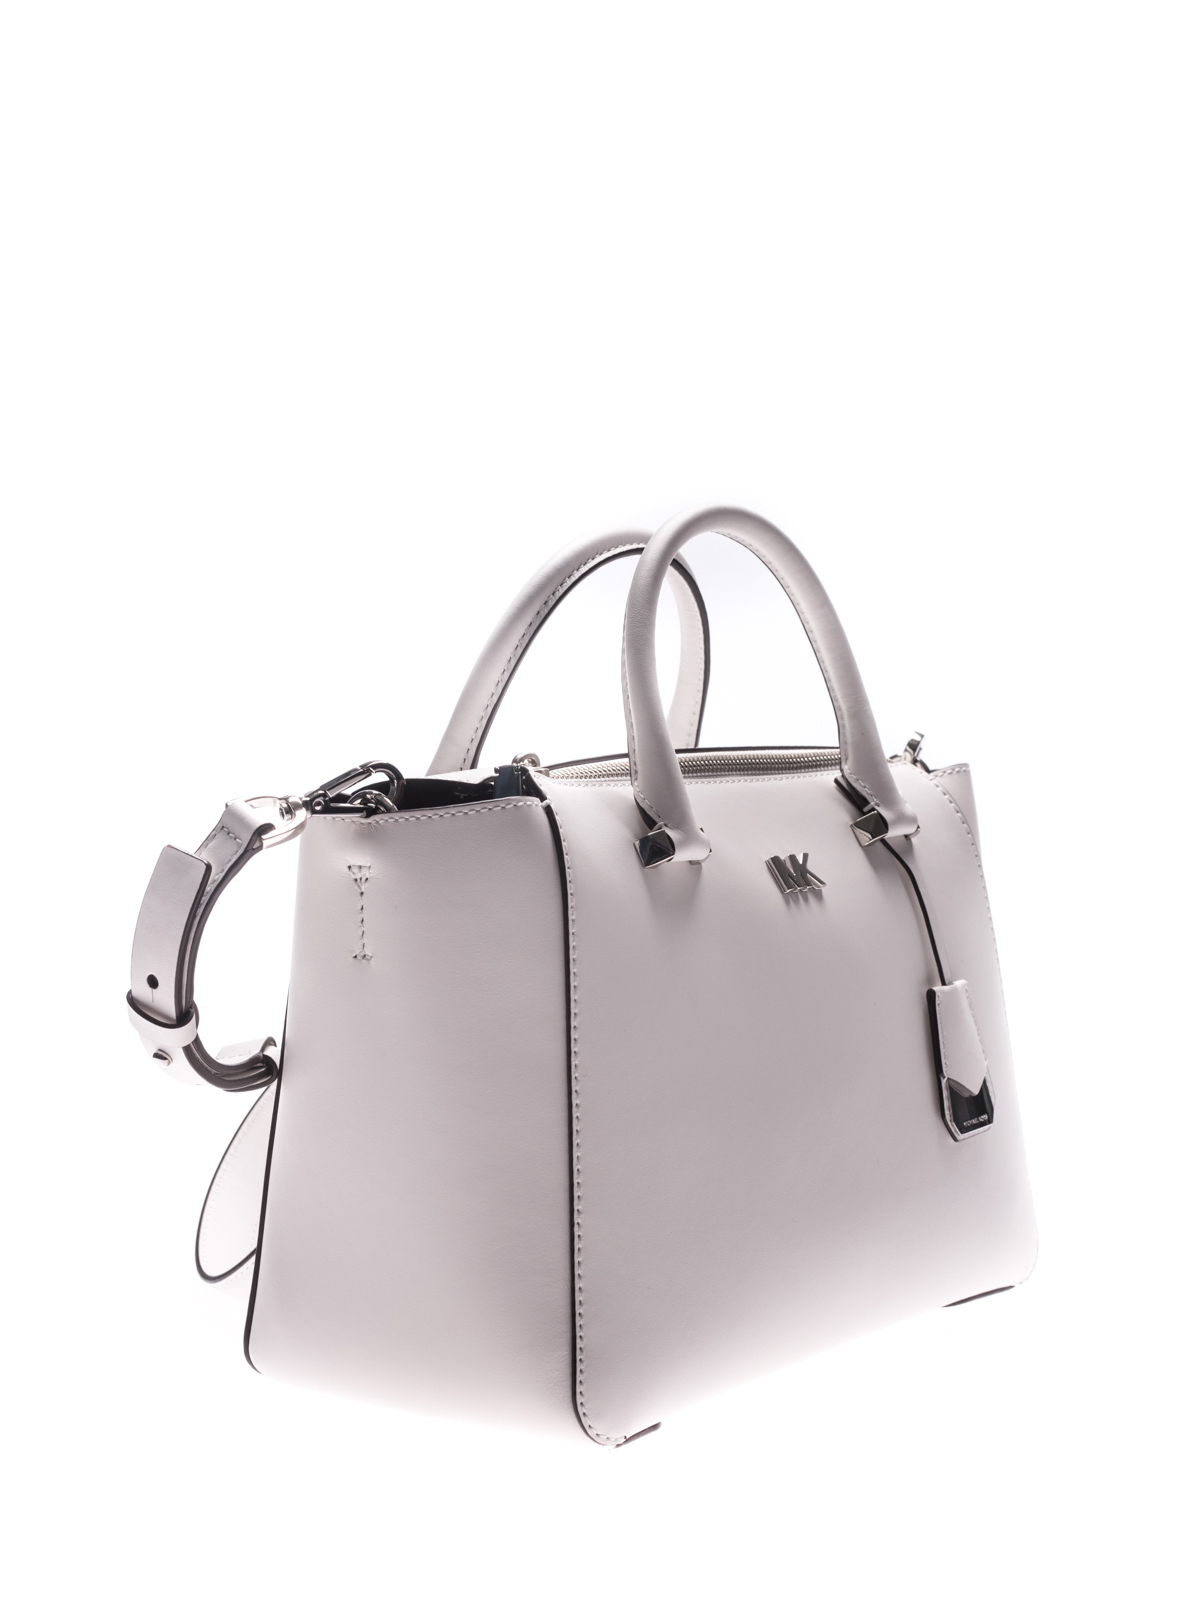 Nolita white leather bag by Michael Kors - totes bags | iKRIX